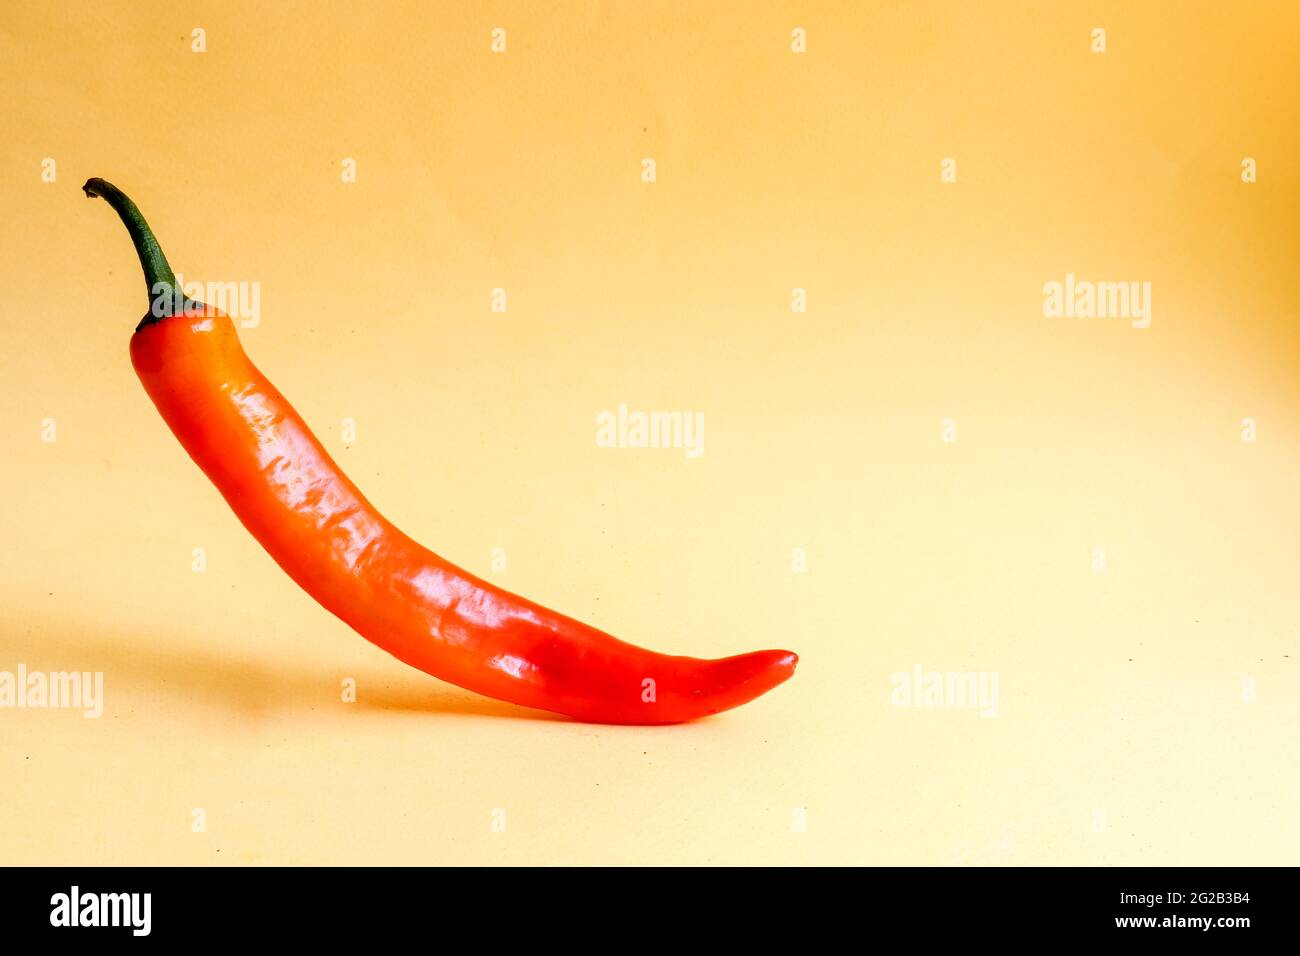 Single chili pepper on yellow background, creative minimalism concept with copy space. Stock Photo